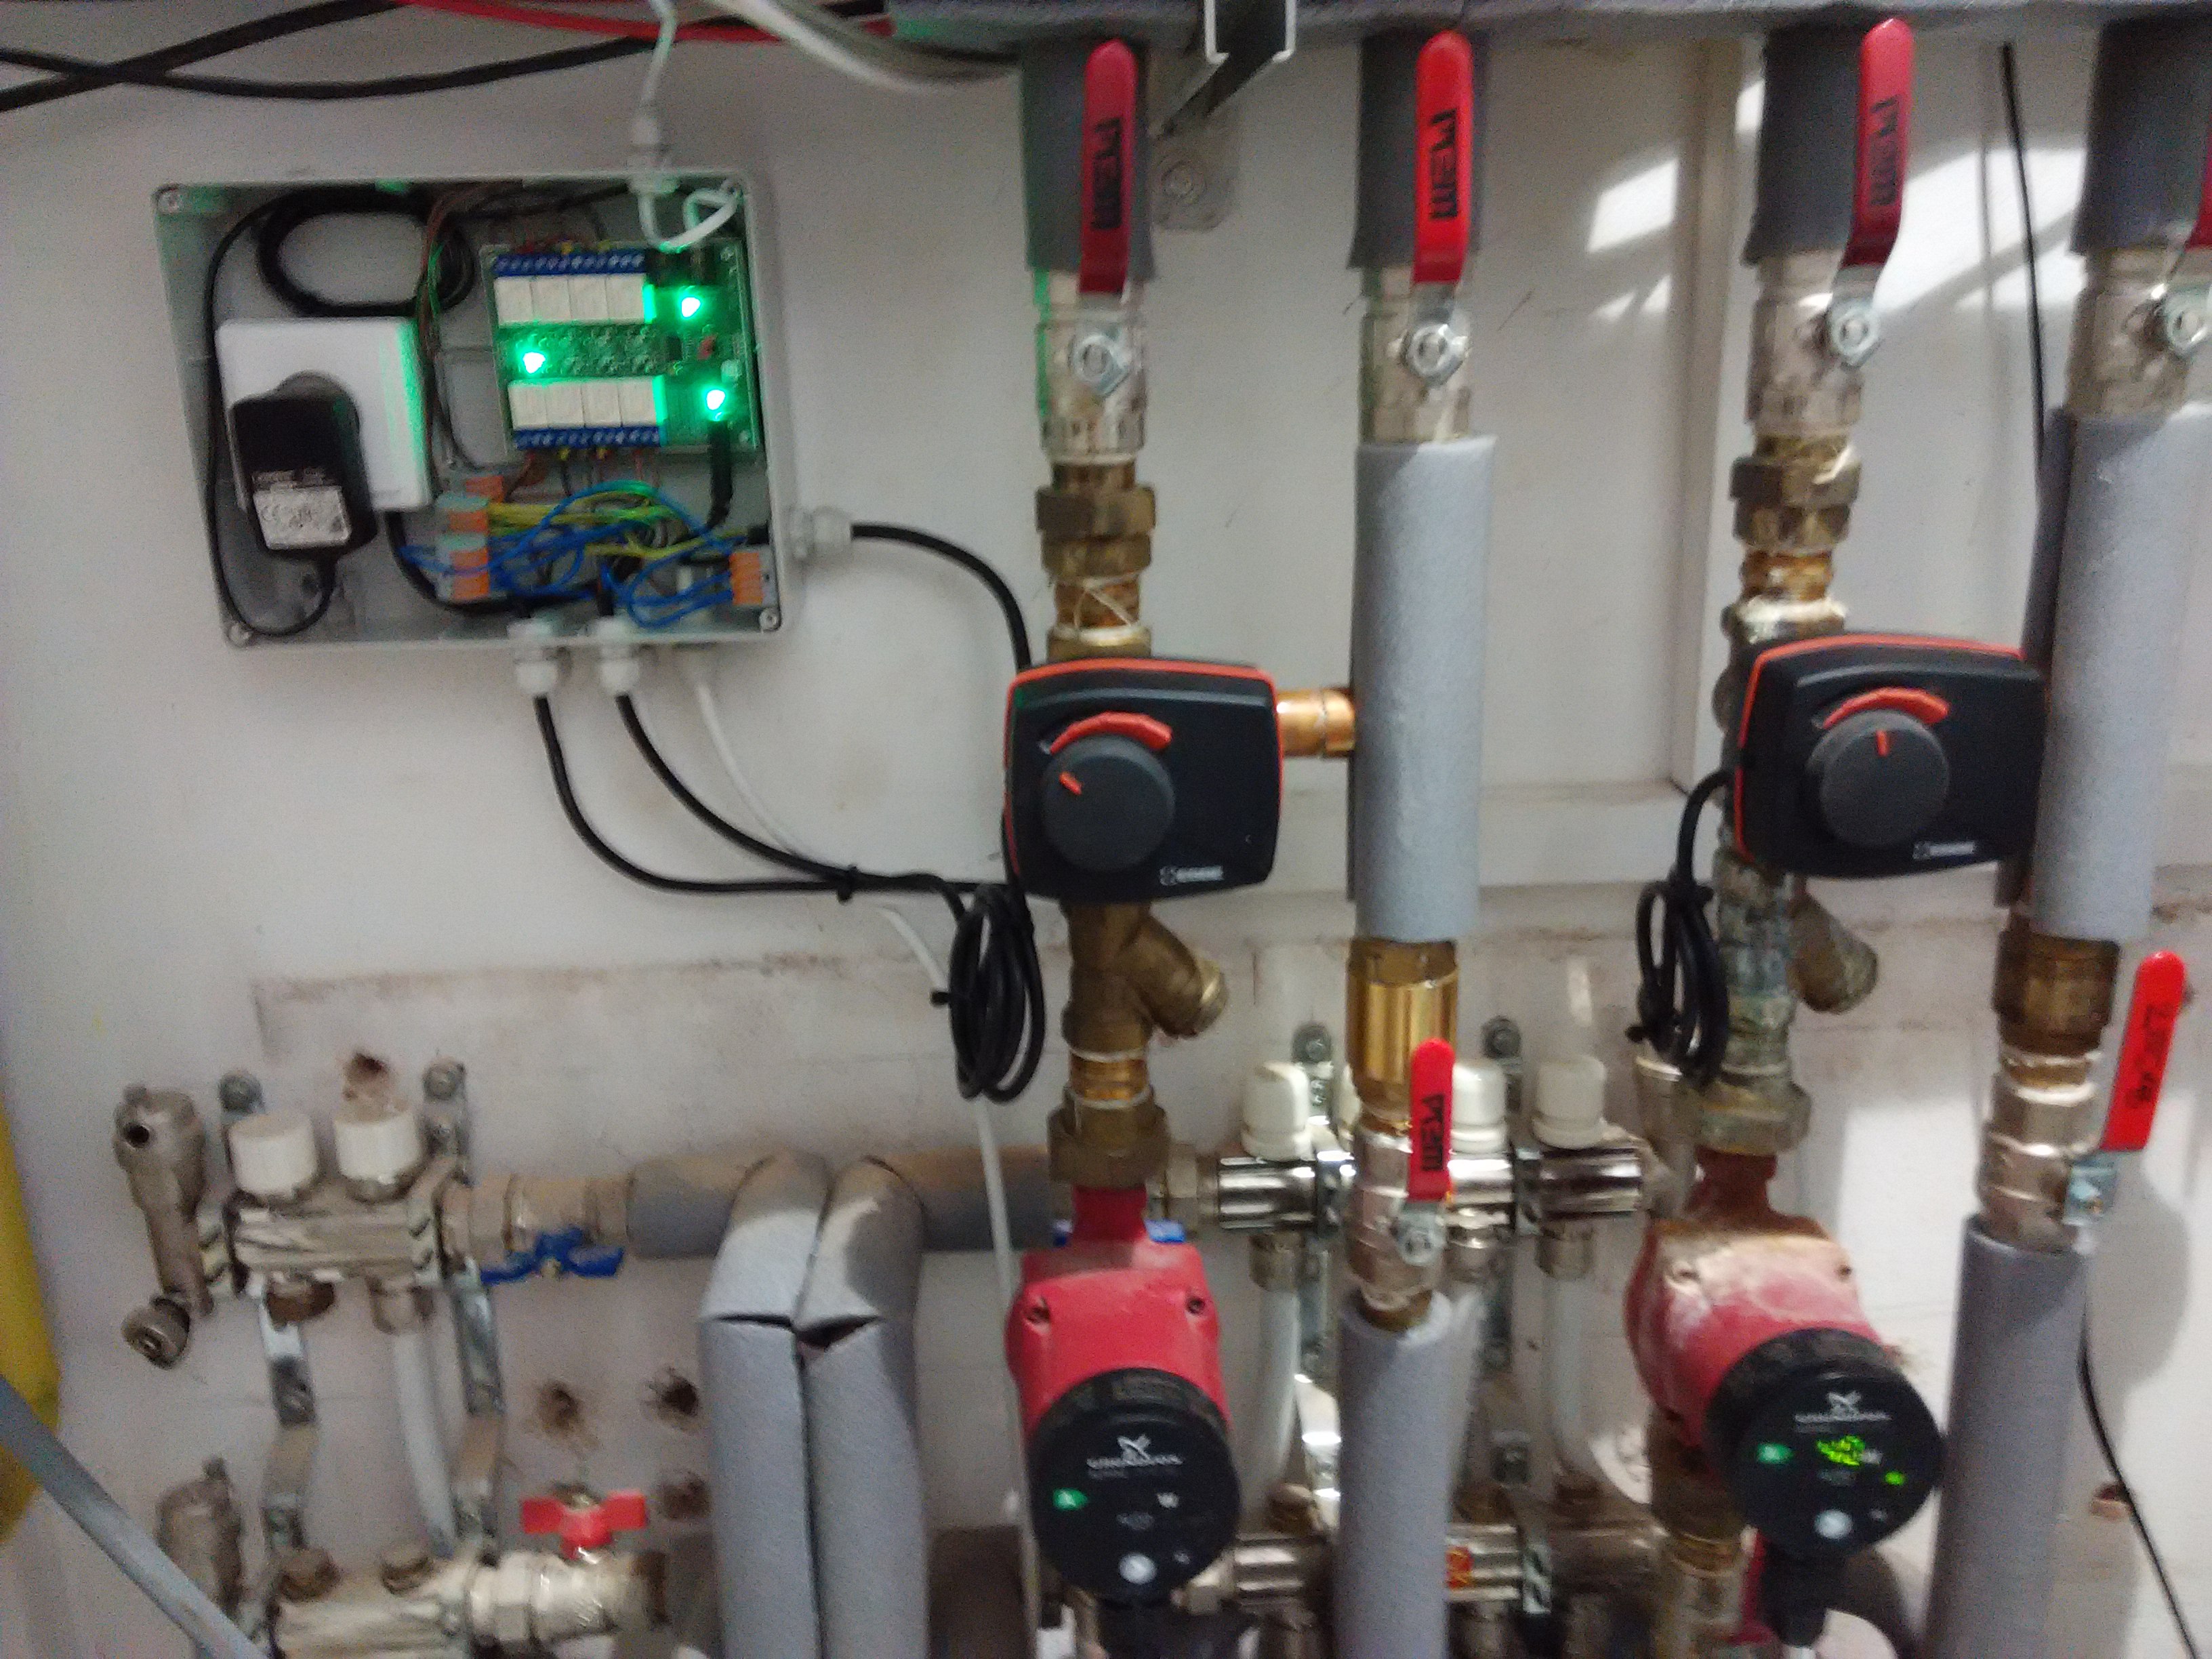 Extension board controller connected to three-way digital valves